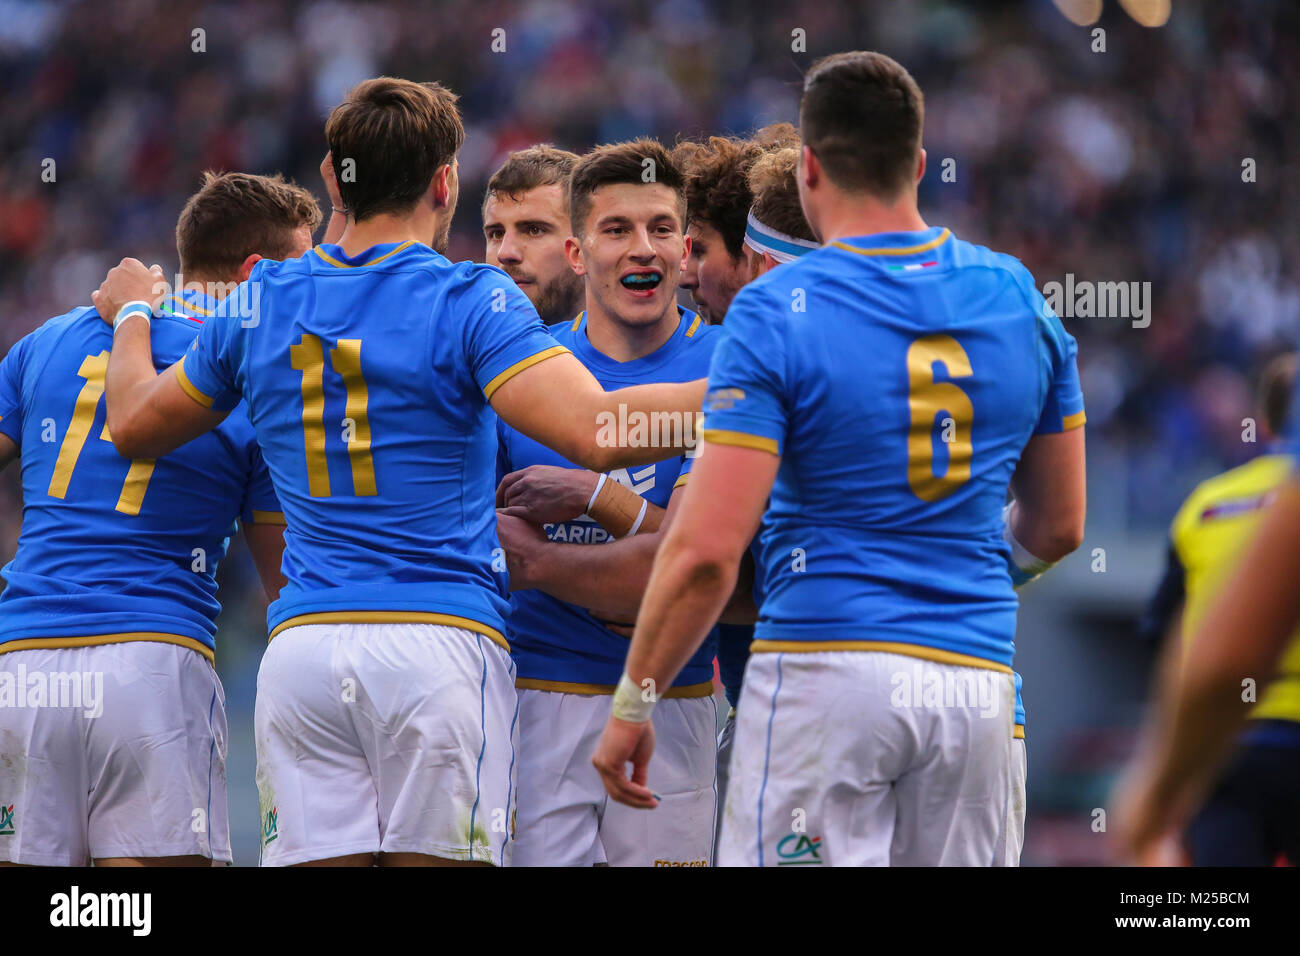 Rome, Italy. 04th February 2018. Italy celebrates after a try in the match against England in NatWest 6Nations Championship 2018 Massimiliano Carnabuci/Alamy Live News Stock Photo